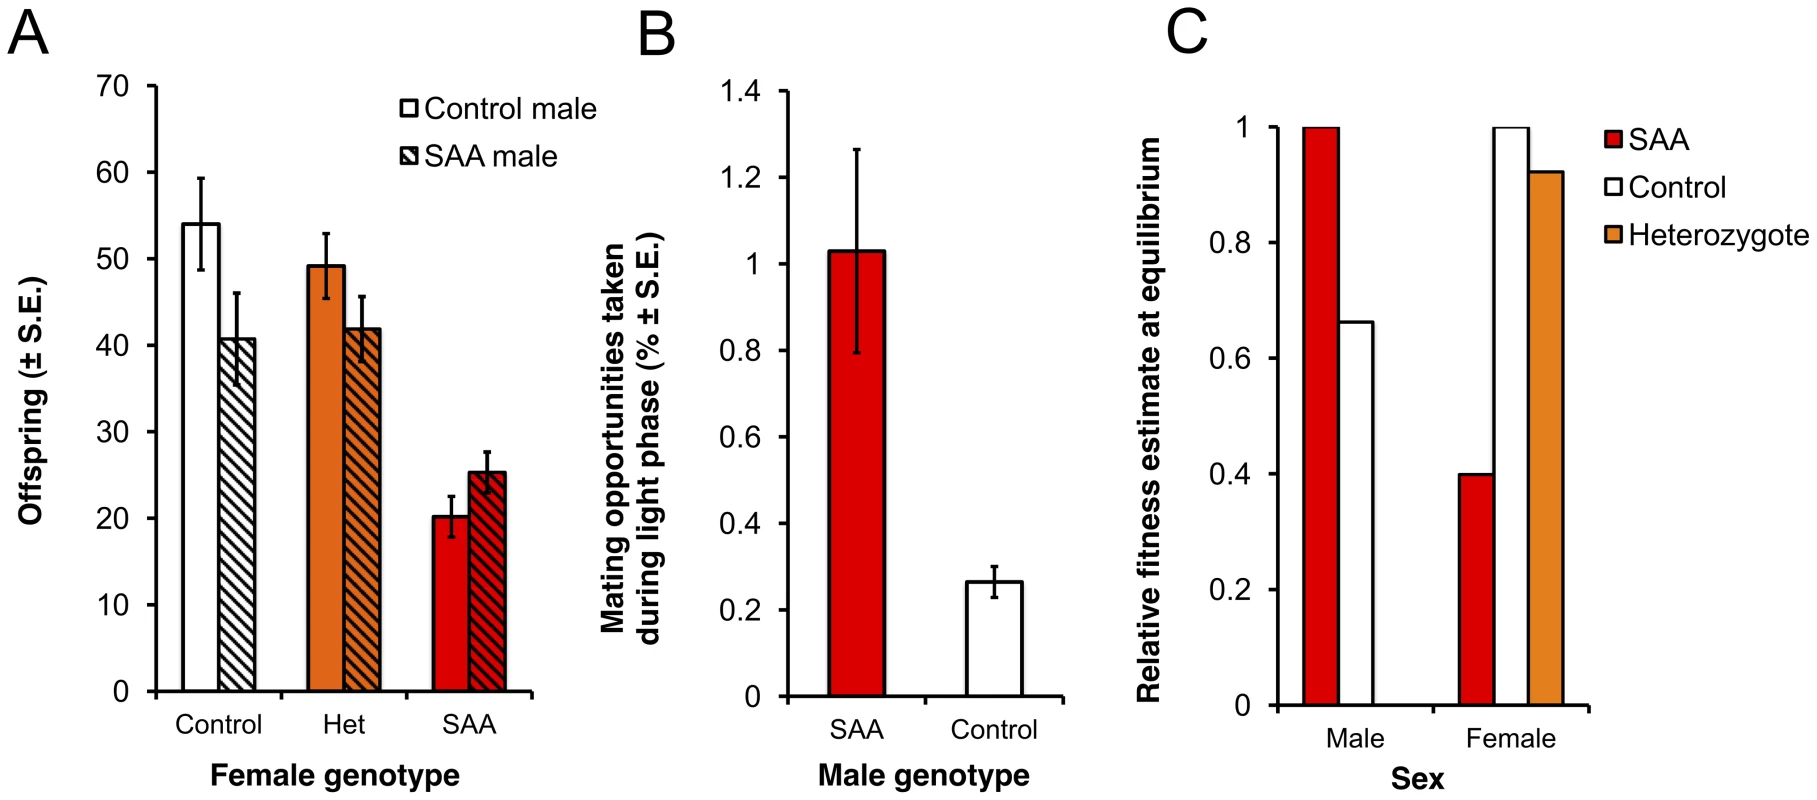 Reproductive success of male and female genotypes.